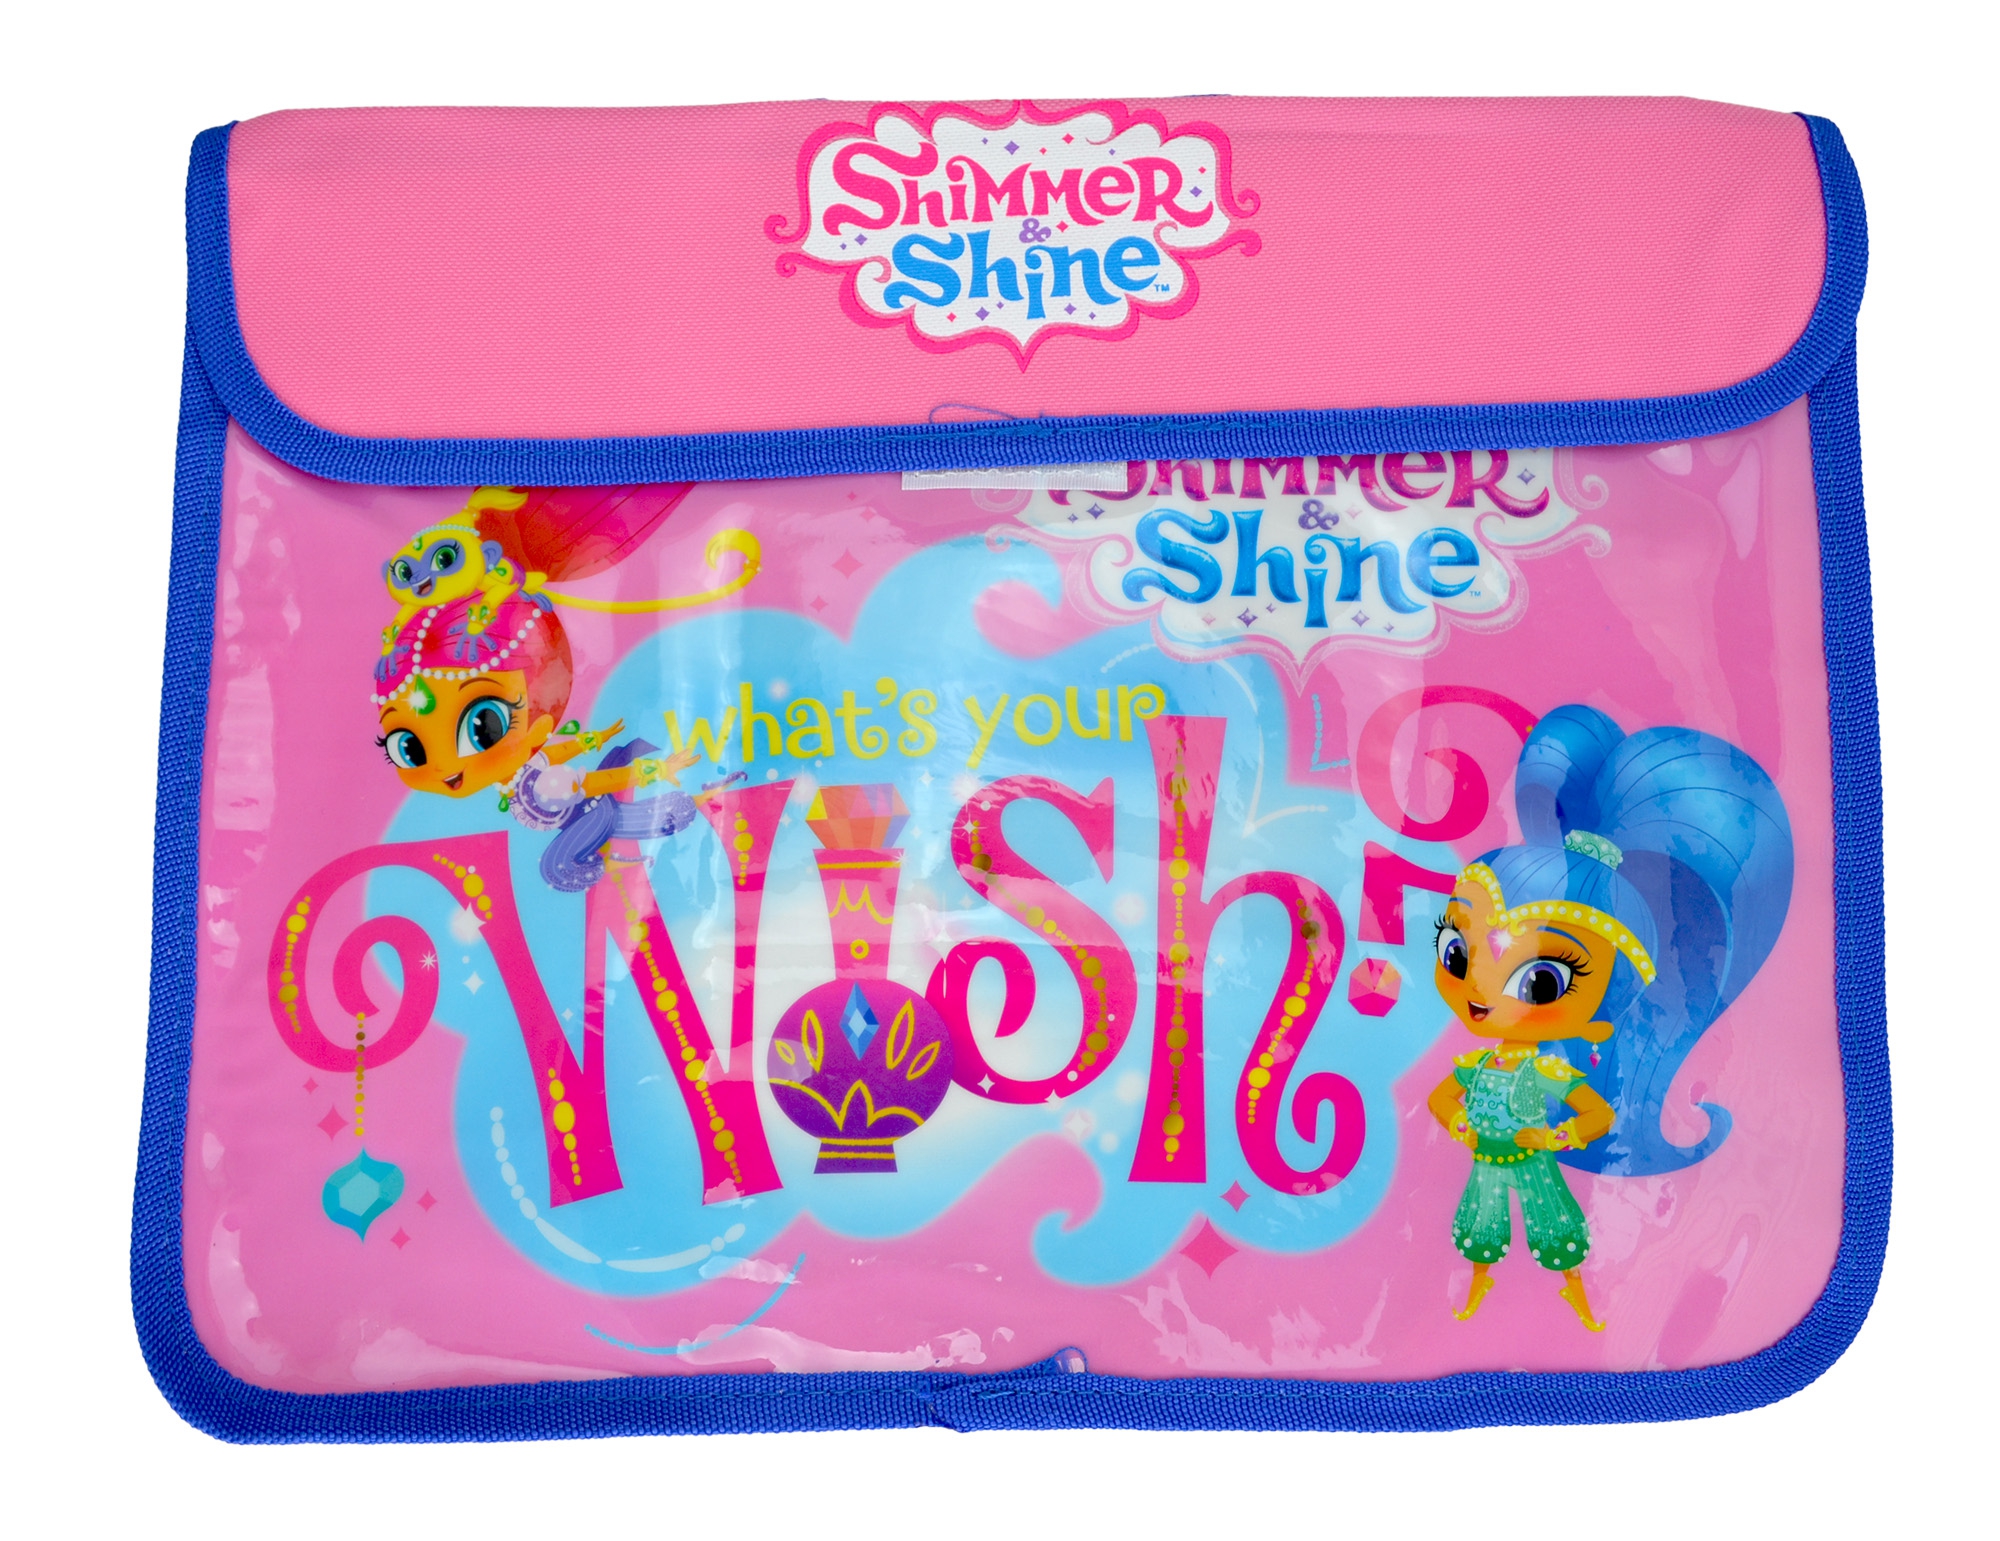 Shimmer & Shine 'What's Your Wish' School Book Bag